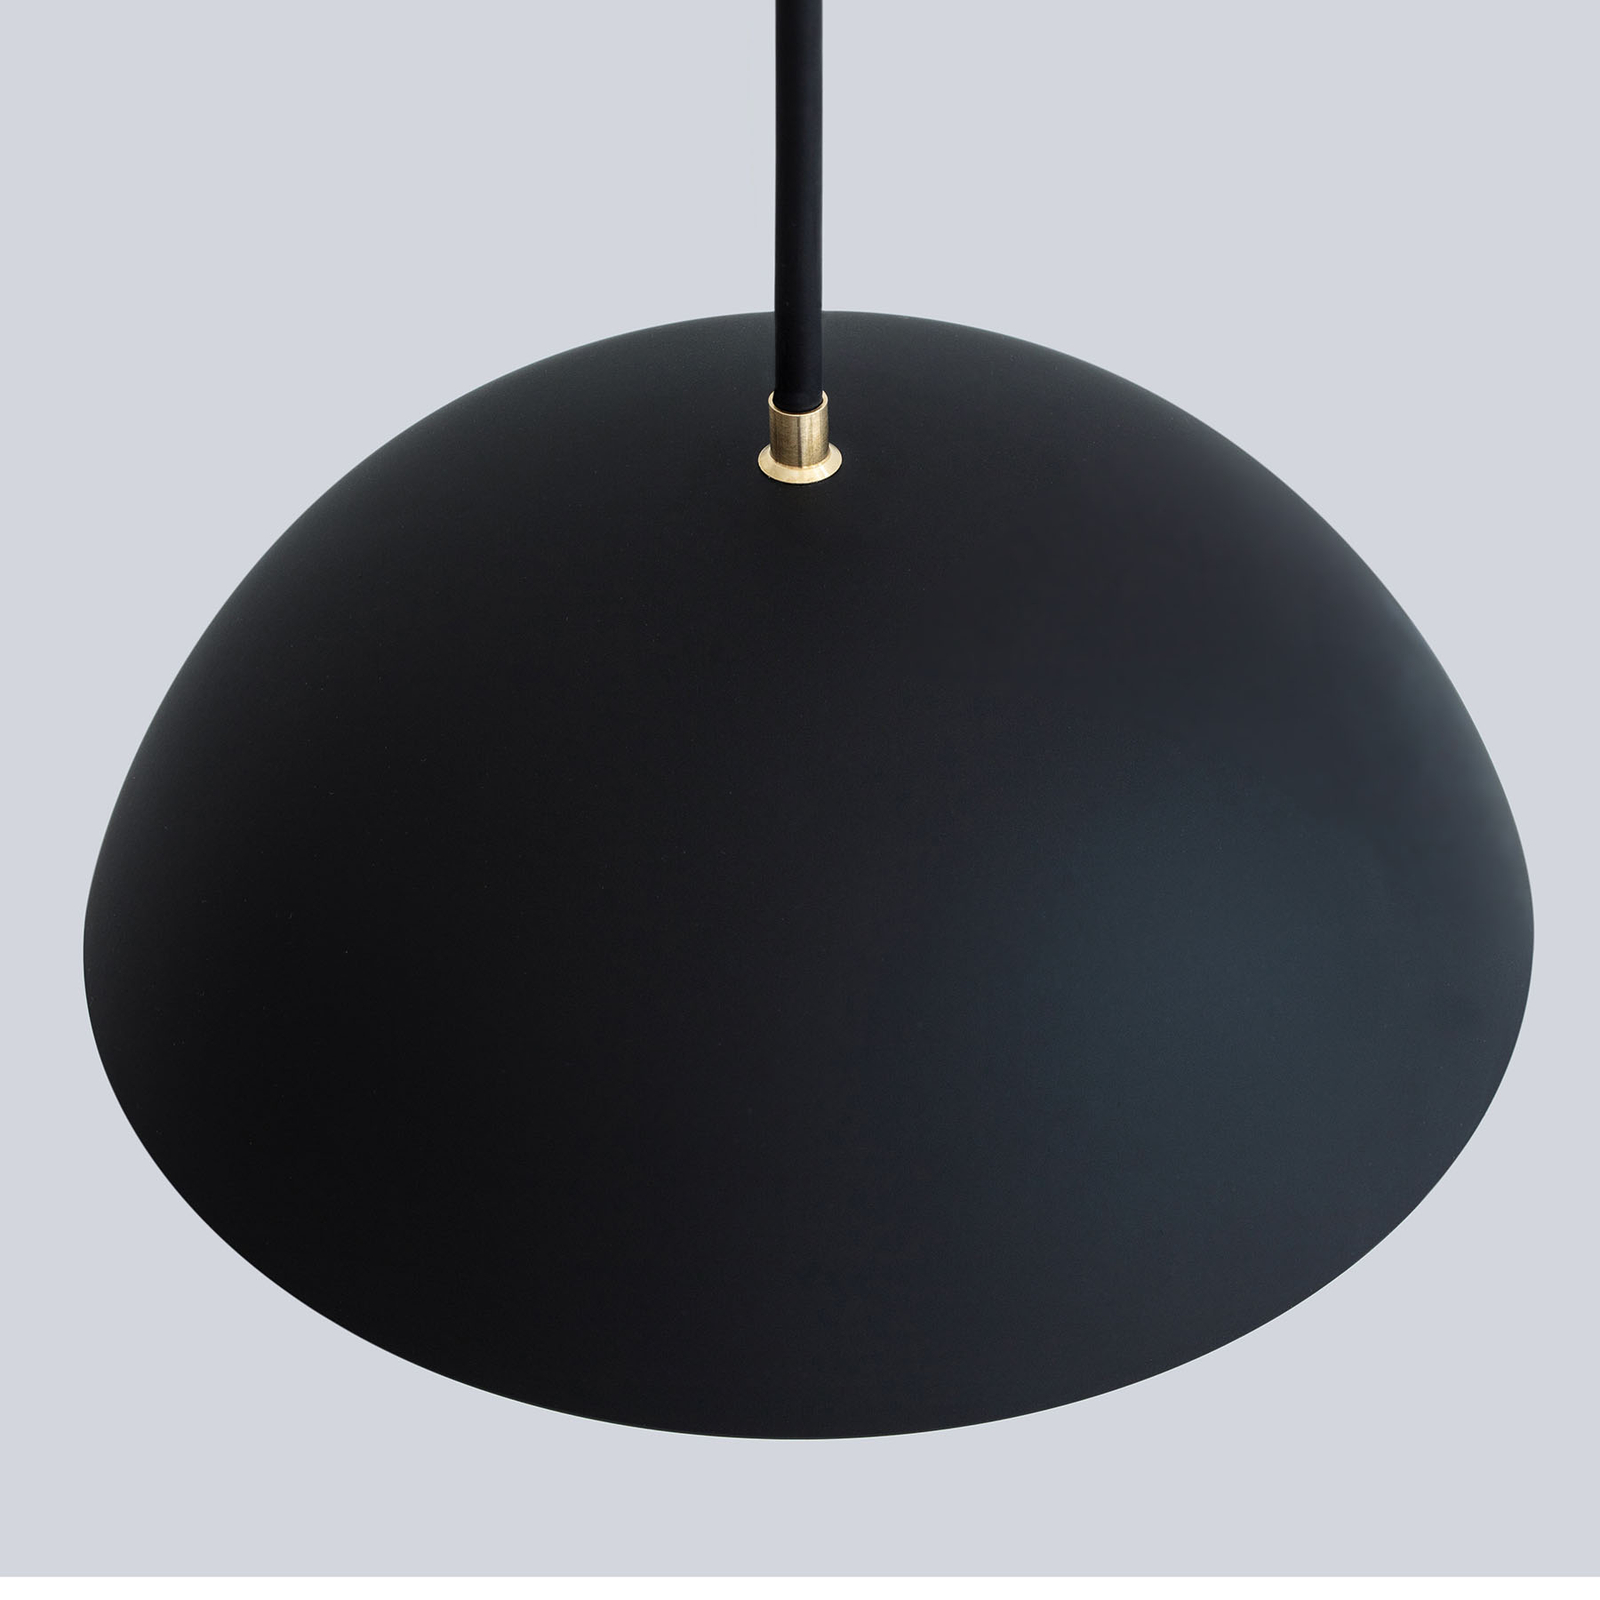 Nyta Pong Ceiling LED pendant light, cable length 5m